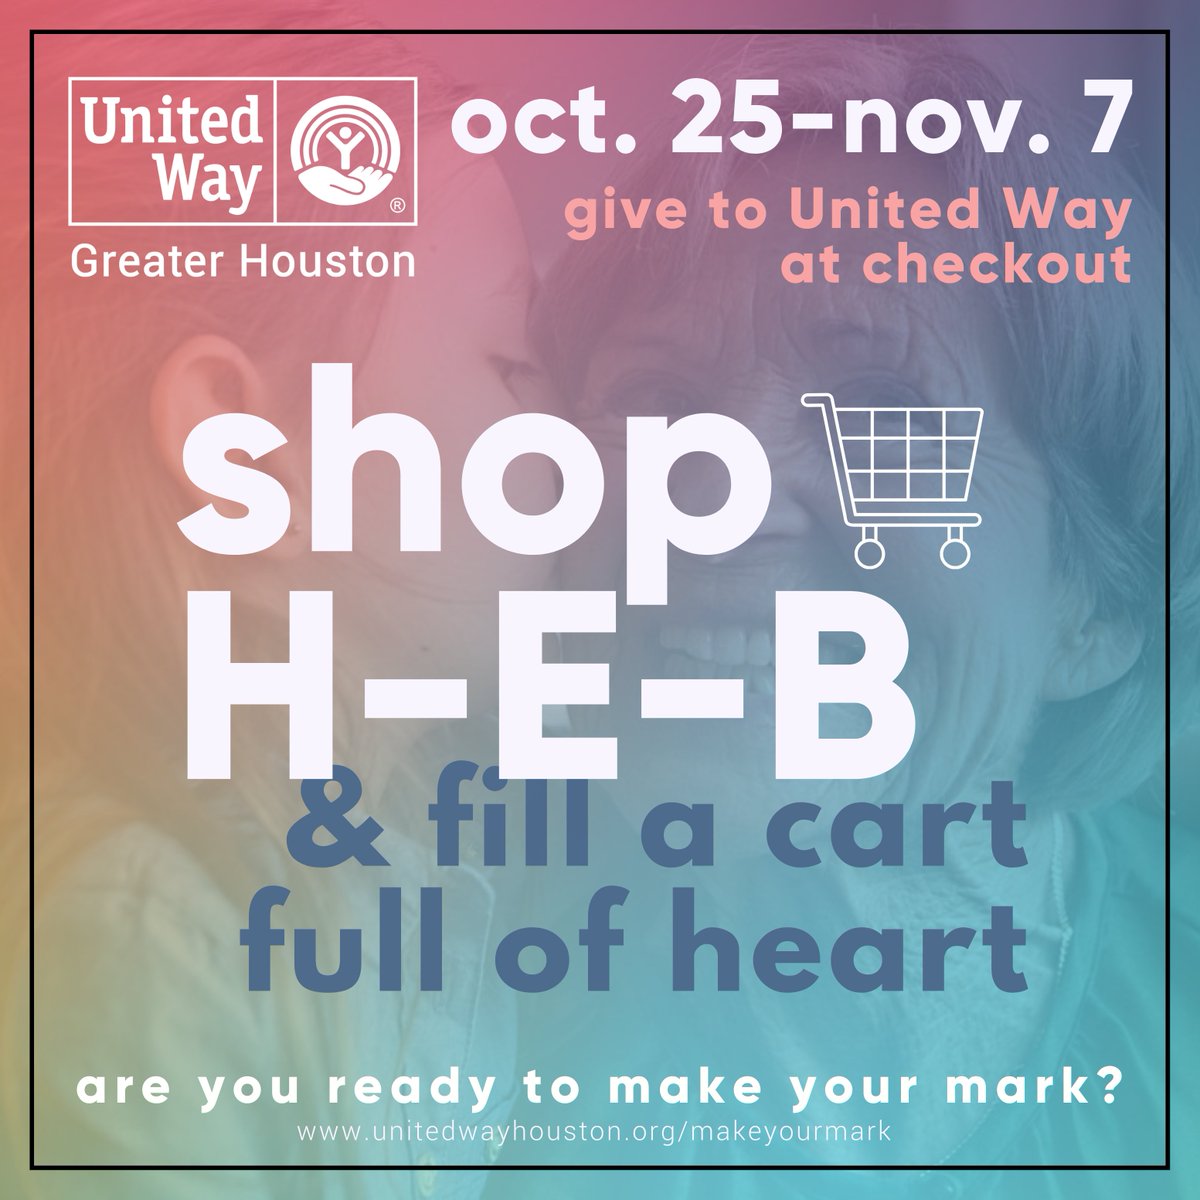 Stock up on essentials while making a difference! Visit your local @HEB from Oct. 25 - Nov. 7 and donate to United Way at check out. Your grocery shopping can help provide our neighbors struggling to get by with basic necessities like food & utilities. #htx #houston